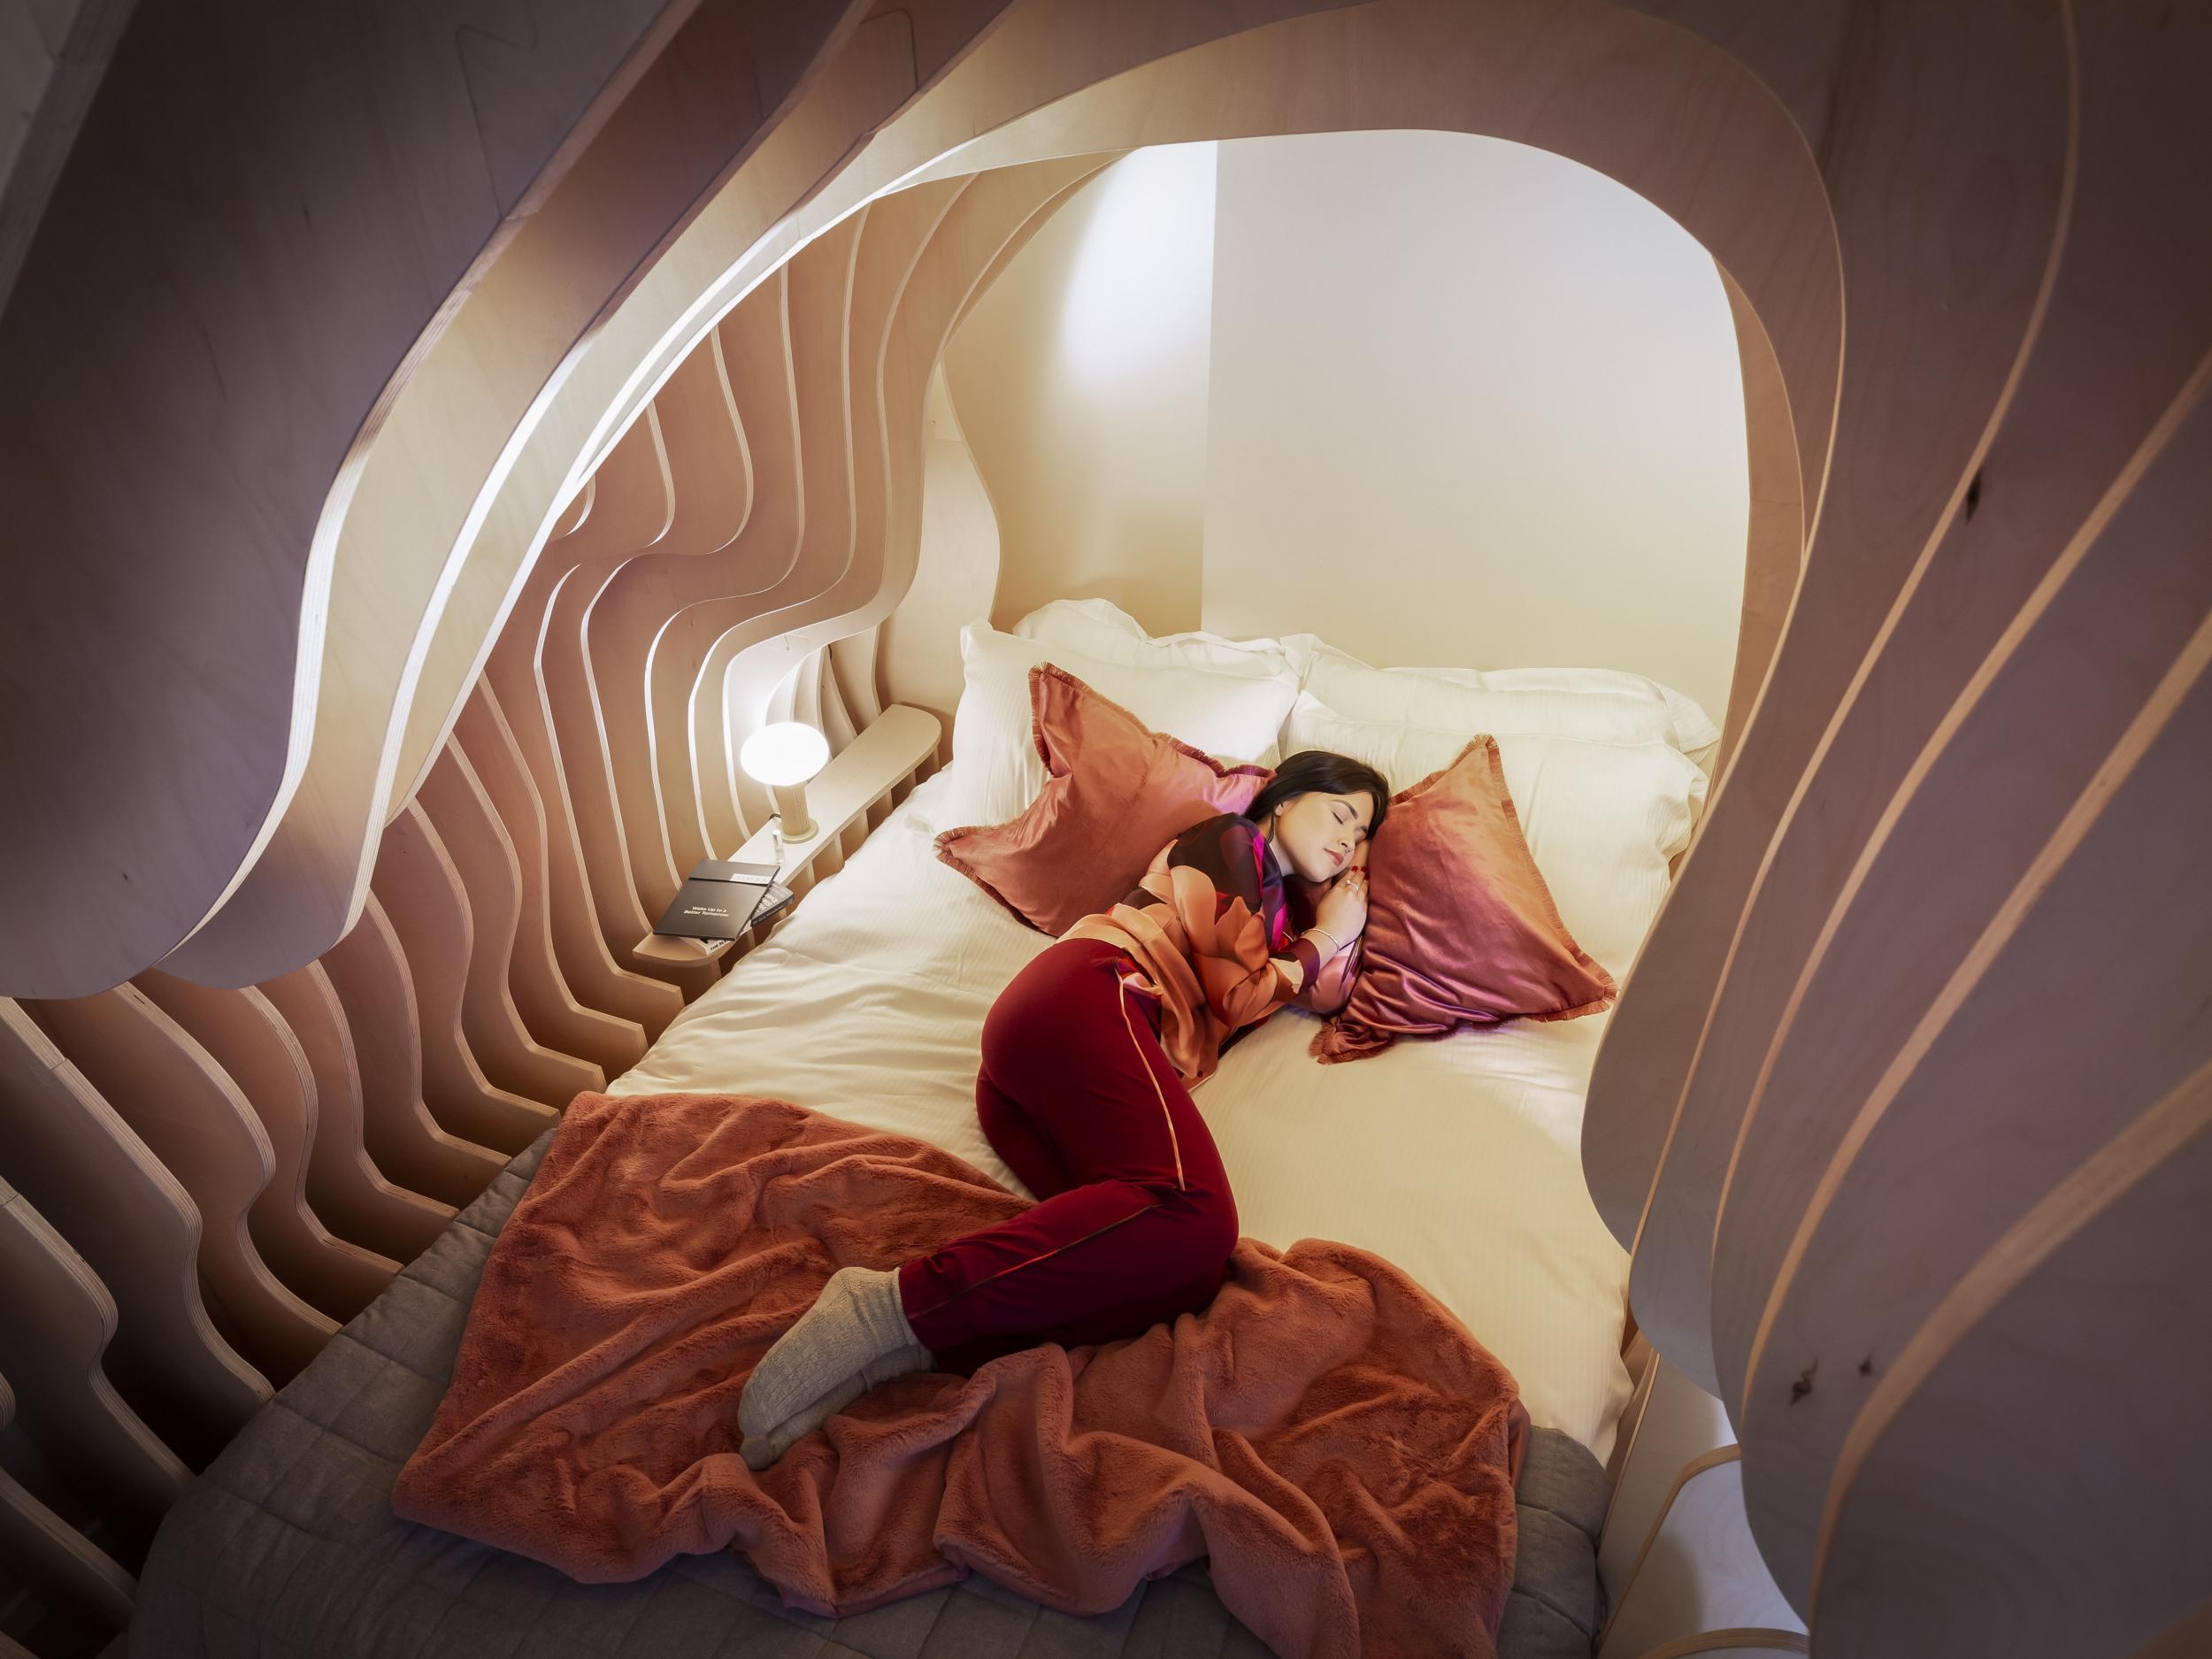 Womb-inspired bedroom designed to help guests 'sleep like a baby